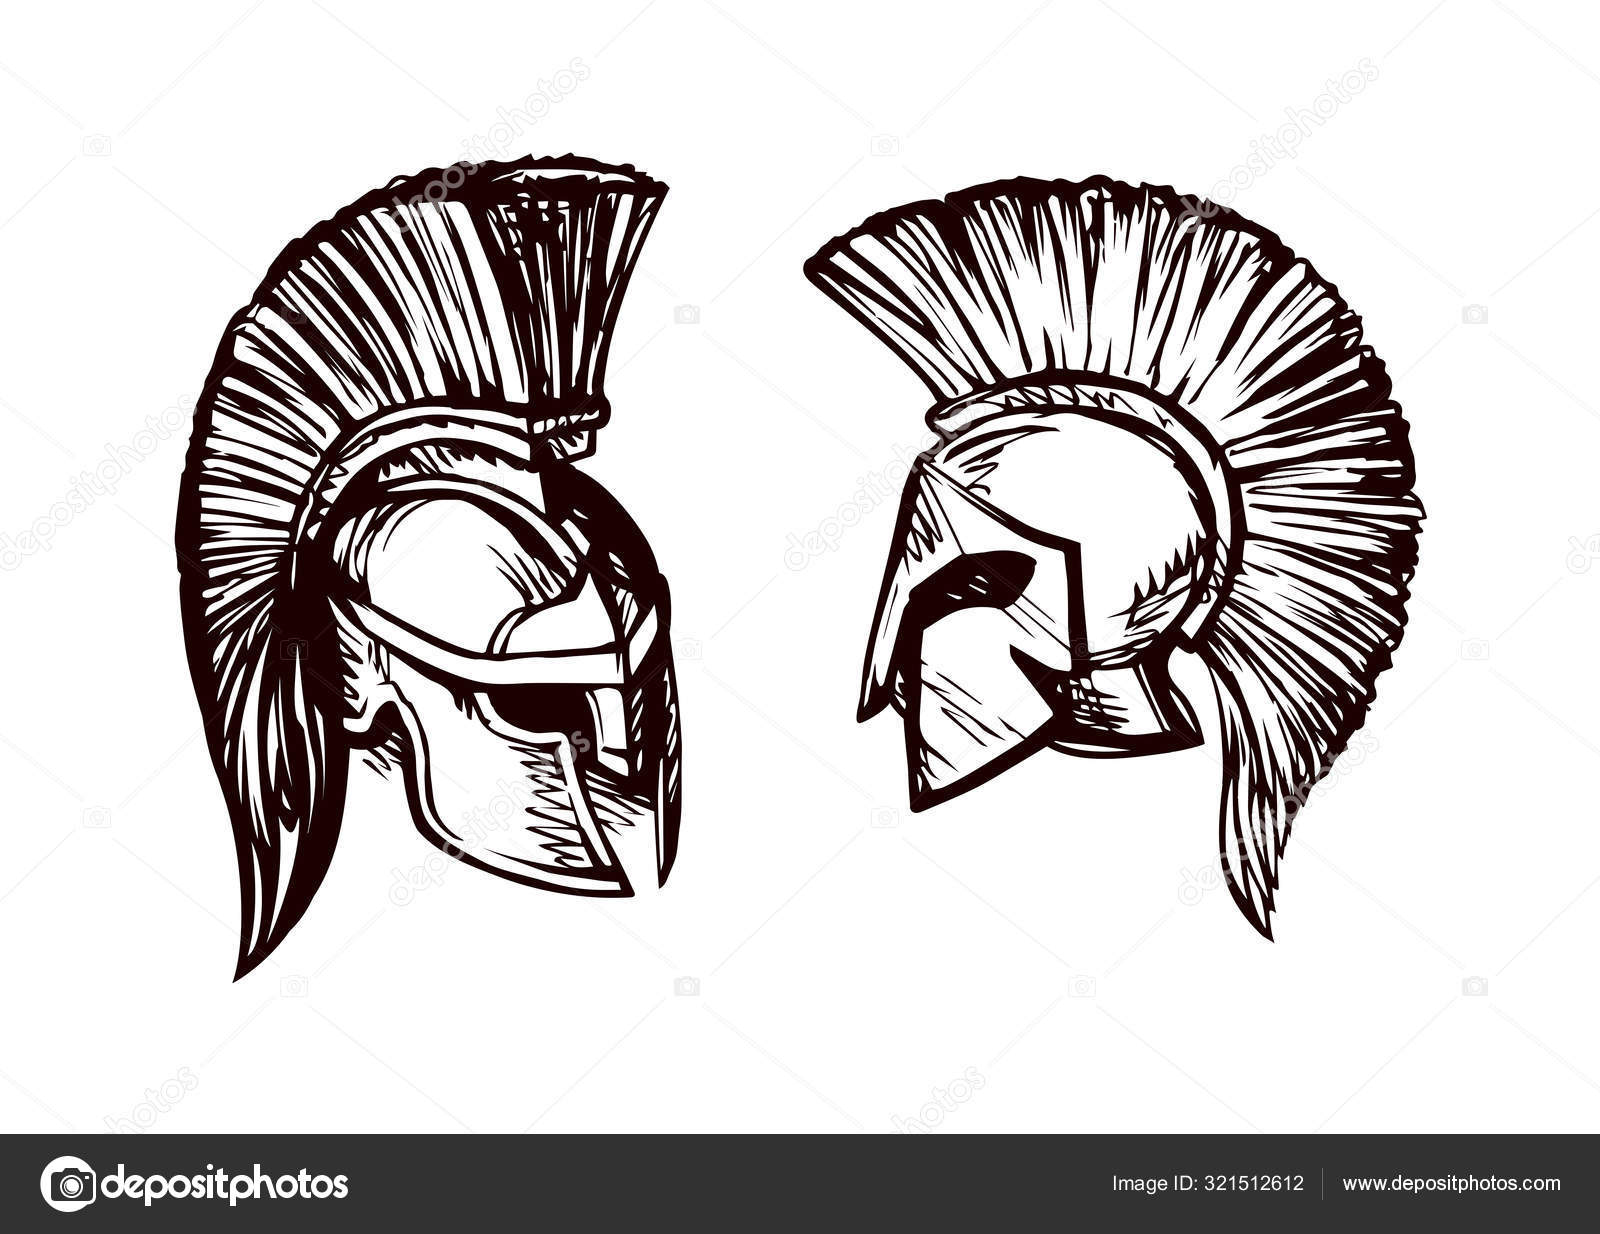 Spartan Helmet Cartoon Drawing High-Res Vector Graphic - Getty Images